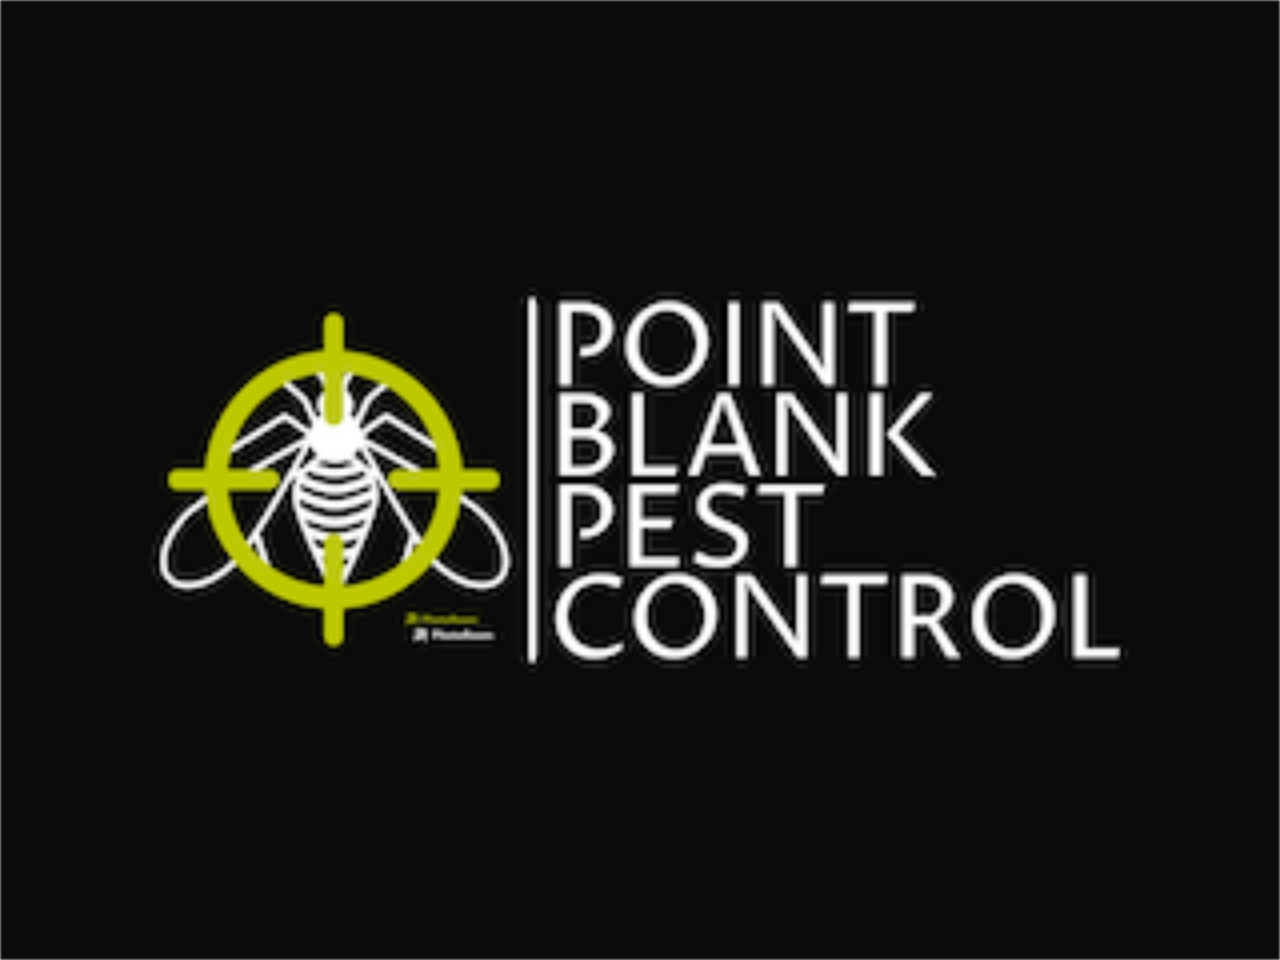 Why Have Pest Control?'s logo